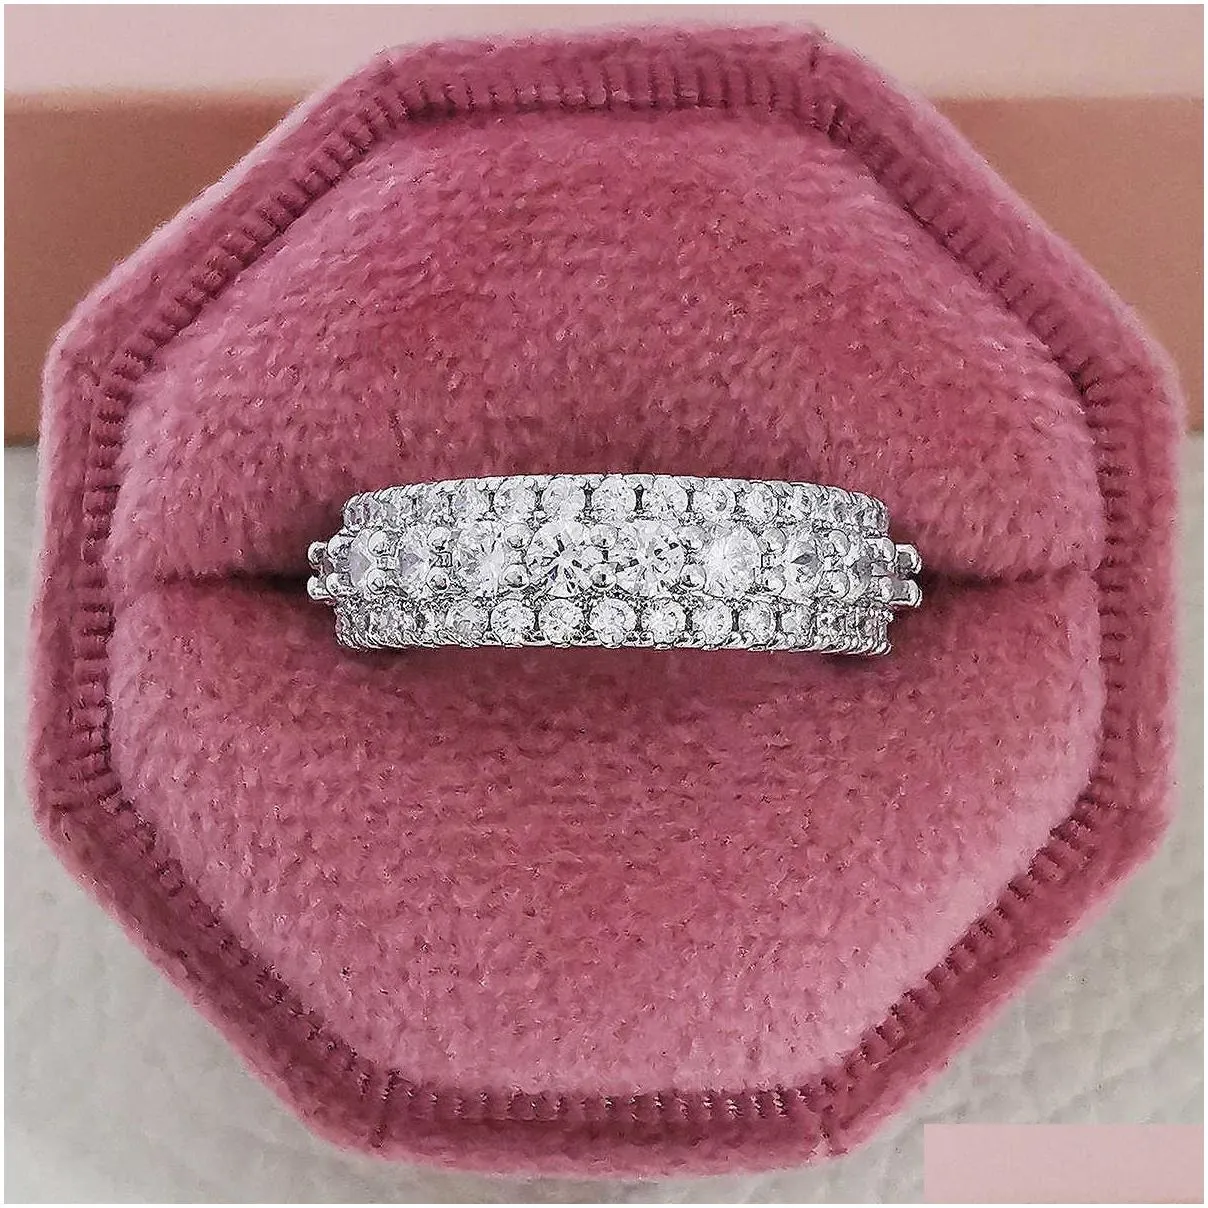 luxury 925 sterling silver wedding band eternity ring for women ladies big finger party anniversary gift lots bulk jewelry r4577 x0715